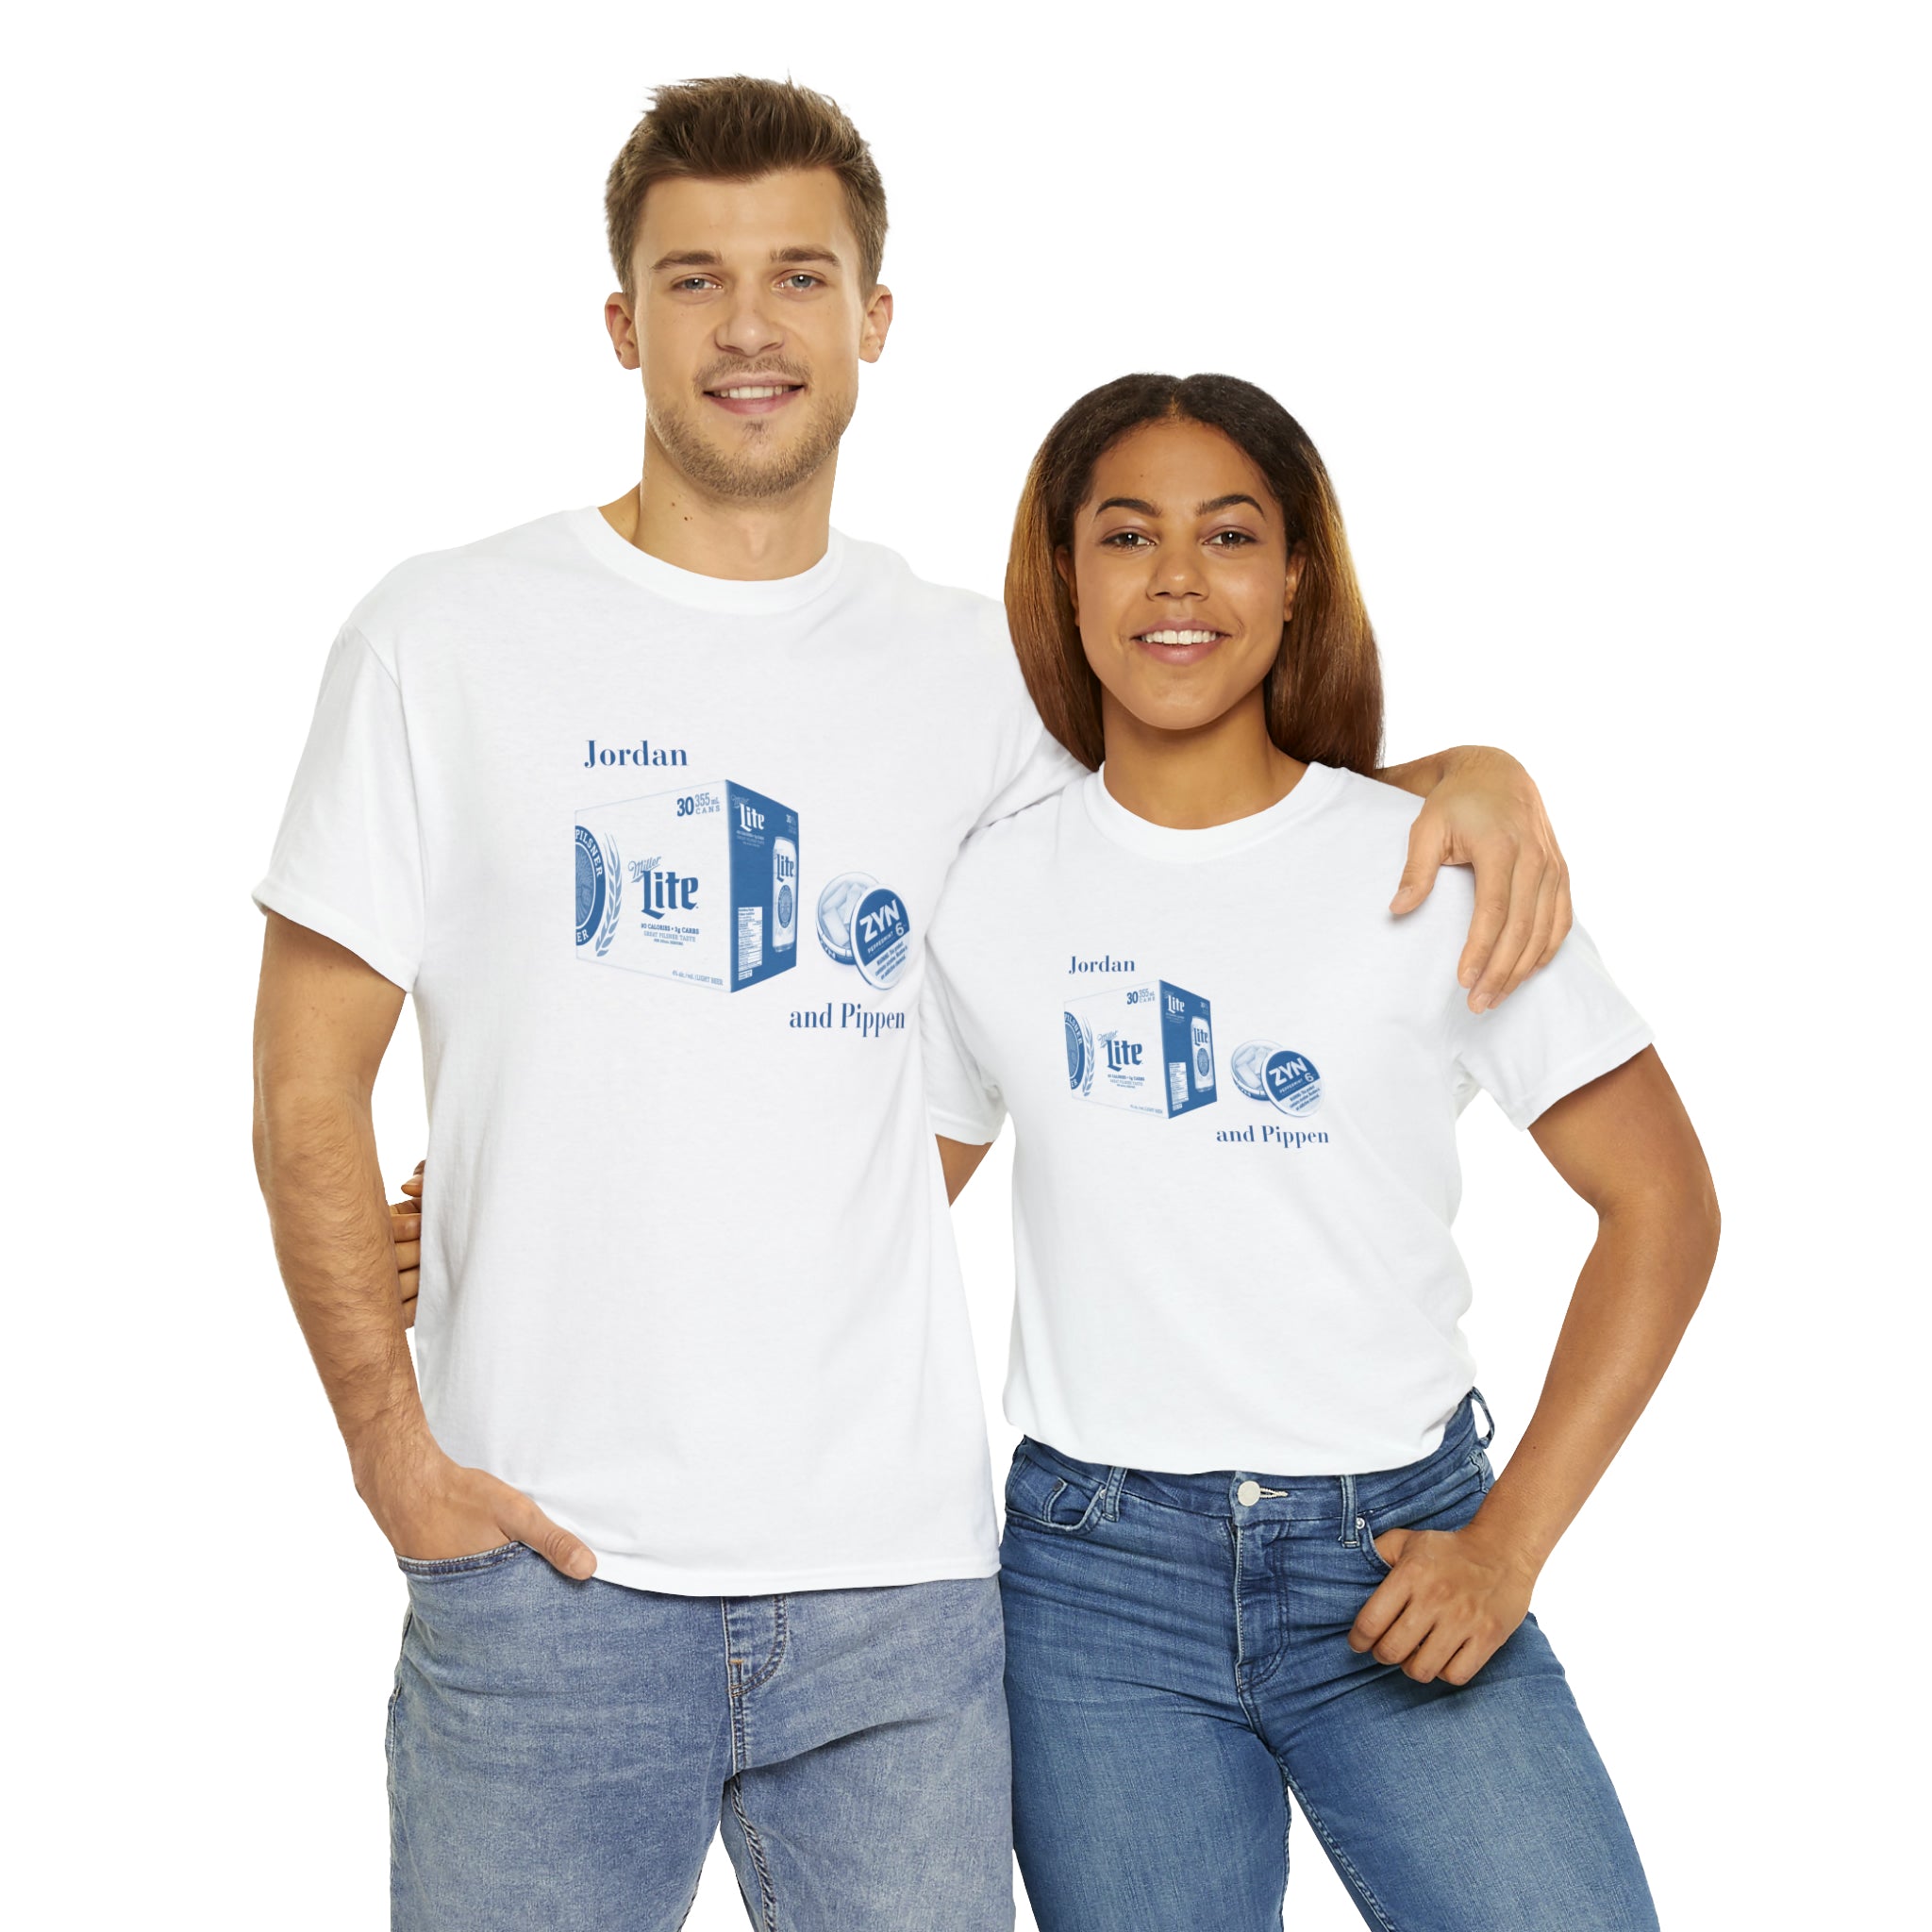 Jordan and Pippen Miller Lite and Zyns 6mg - Unisex Heavy Cotton Tee